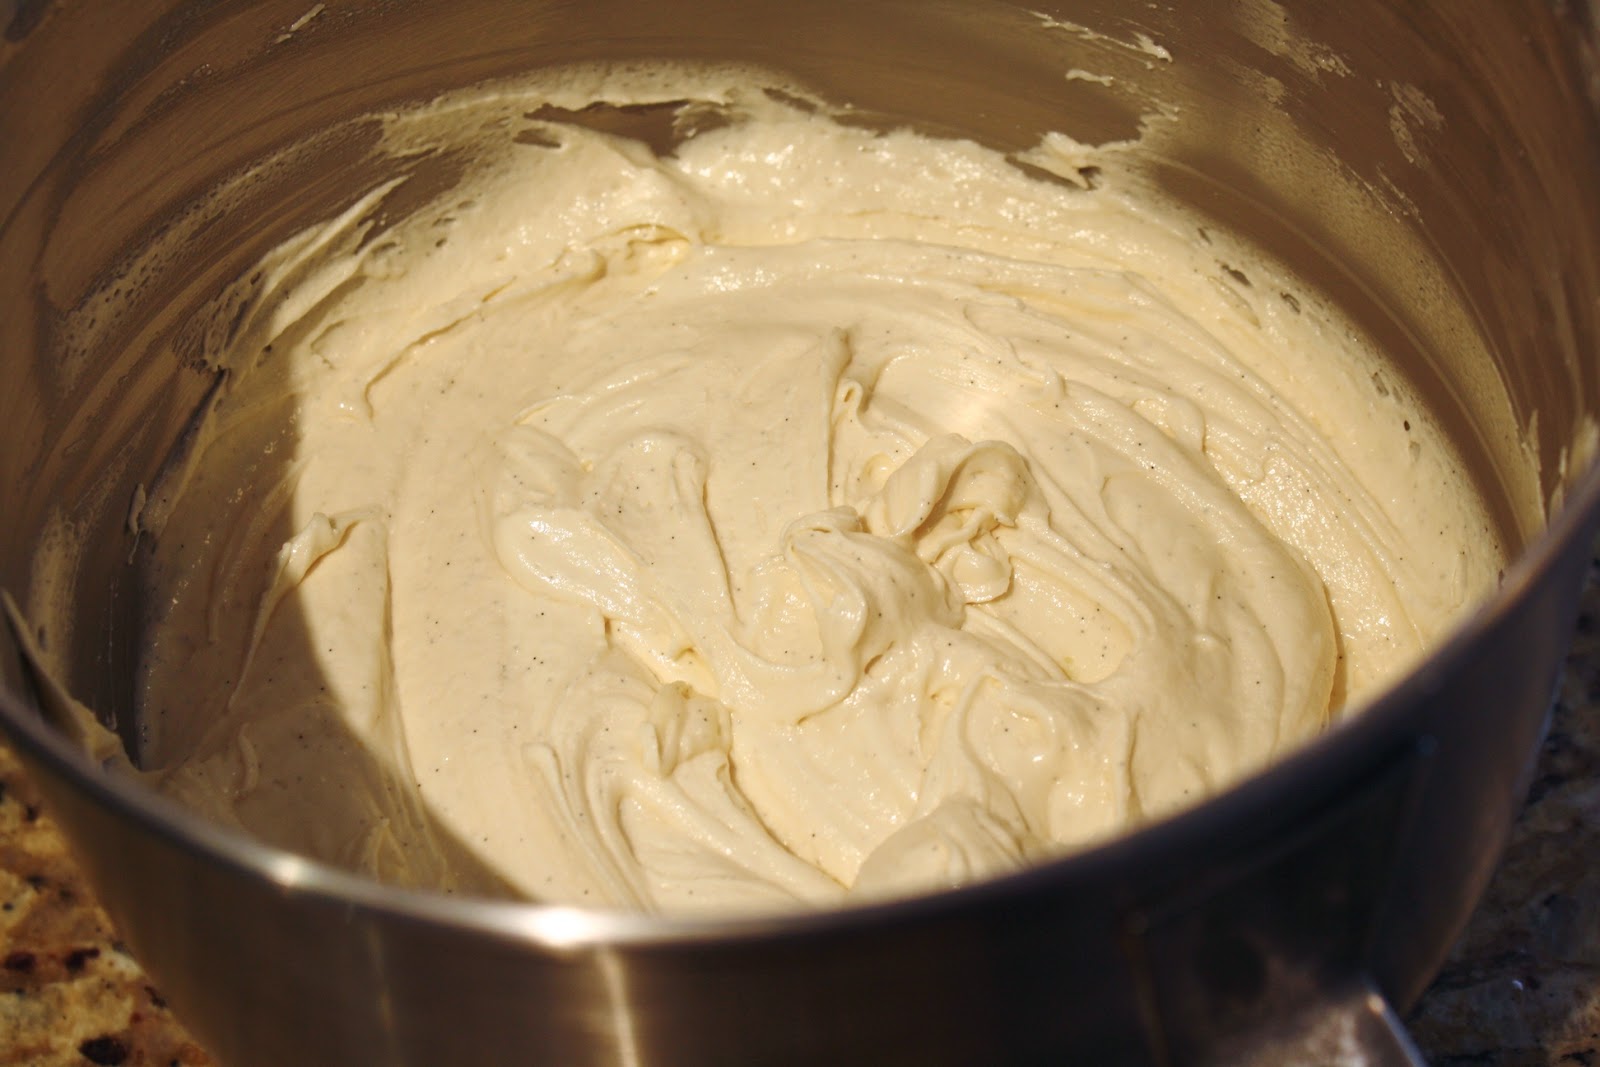 A close up of a bowl of buttercream